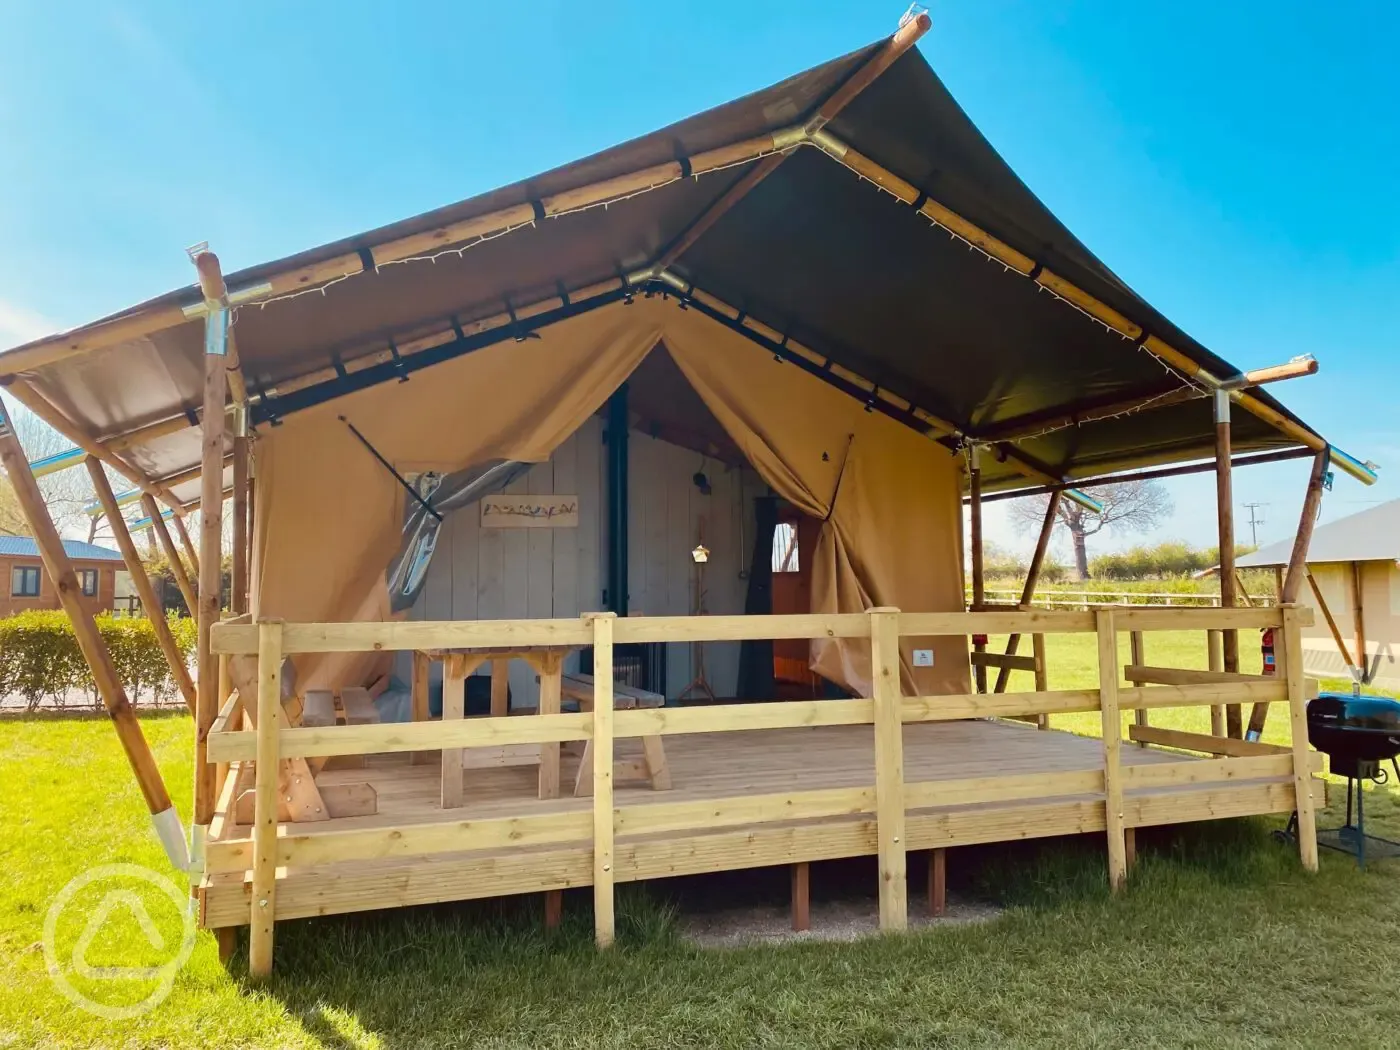 Two safari tents, Hare's Hideout and Swallow Snug